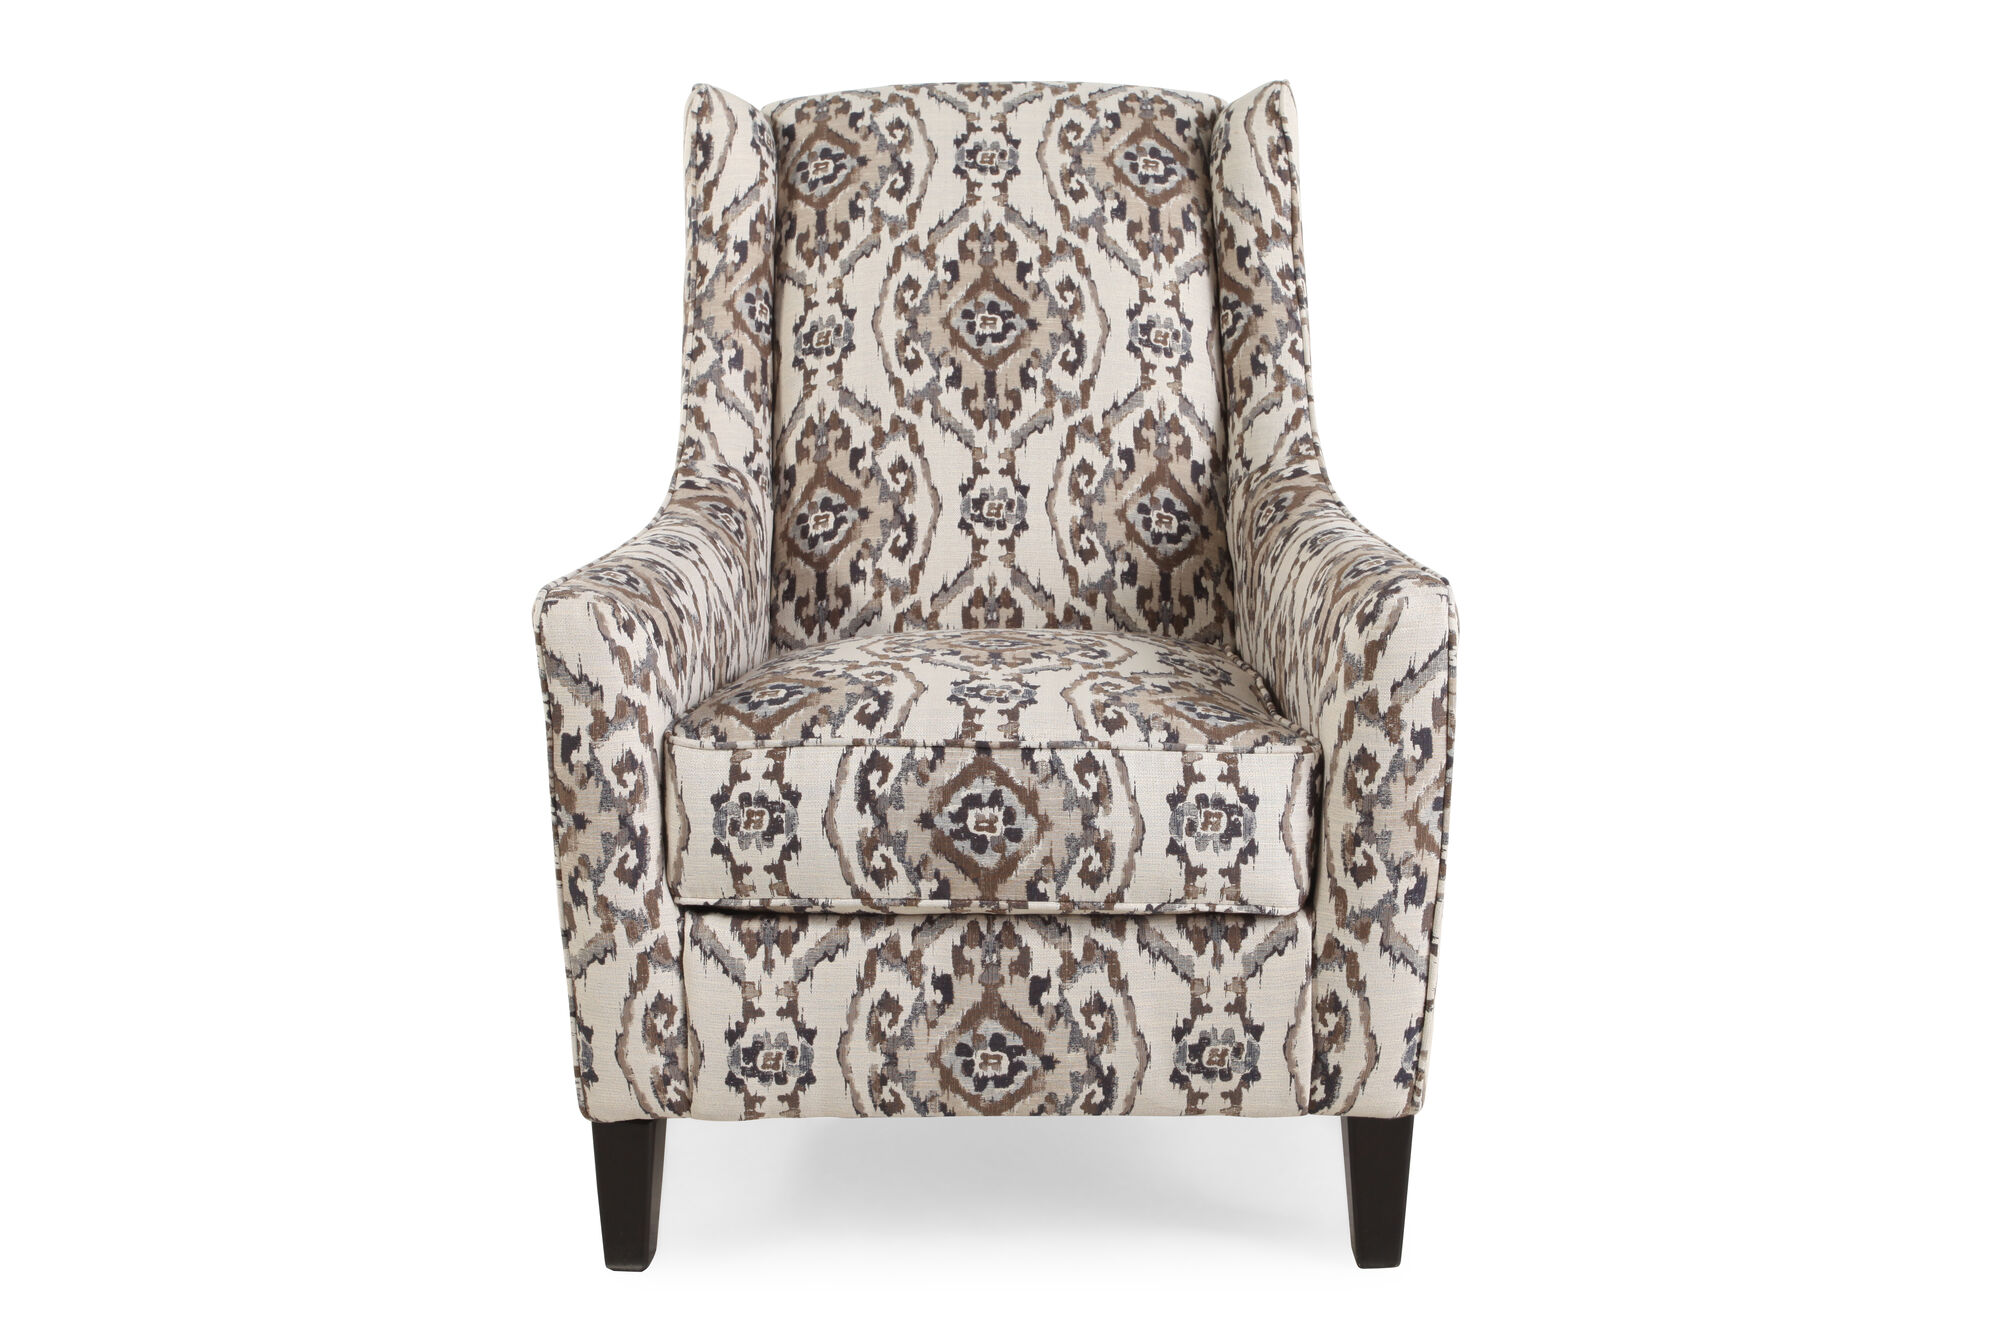 Patterned Traditional 29" Accent Chair in Cream | Mathis Brothers Furniture